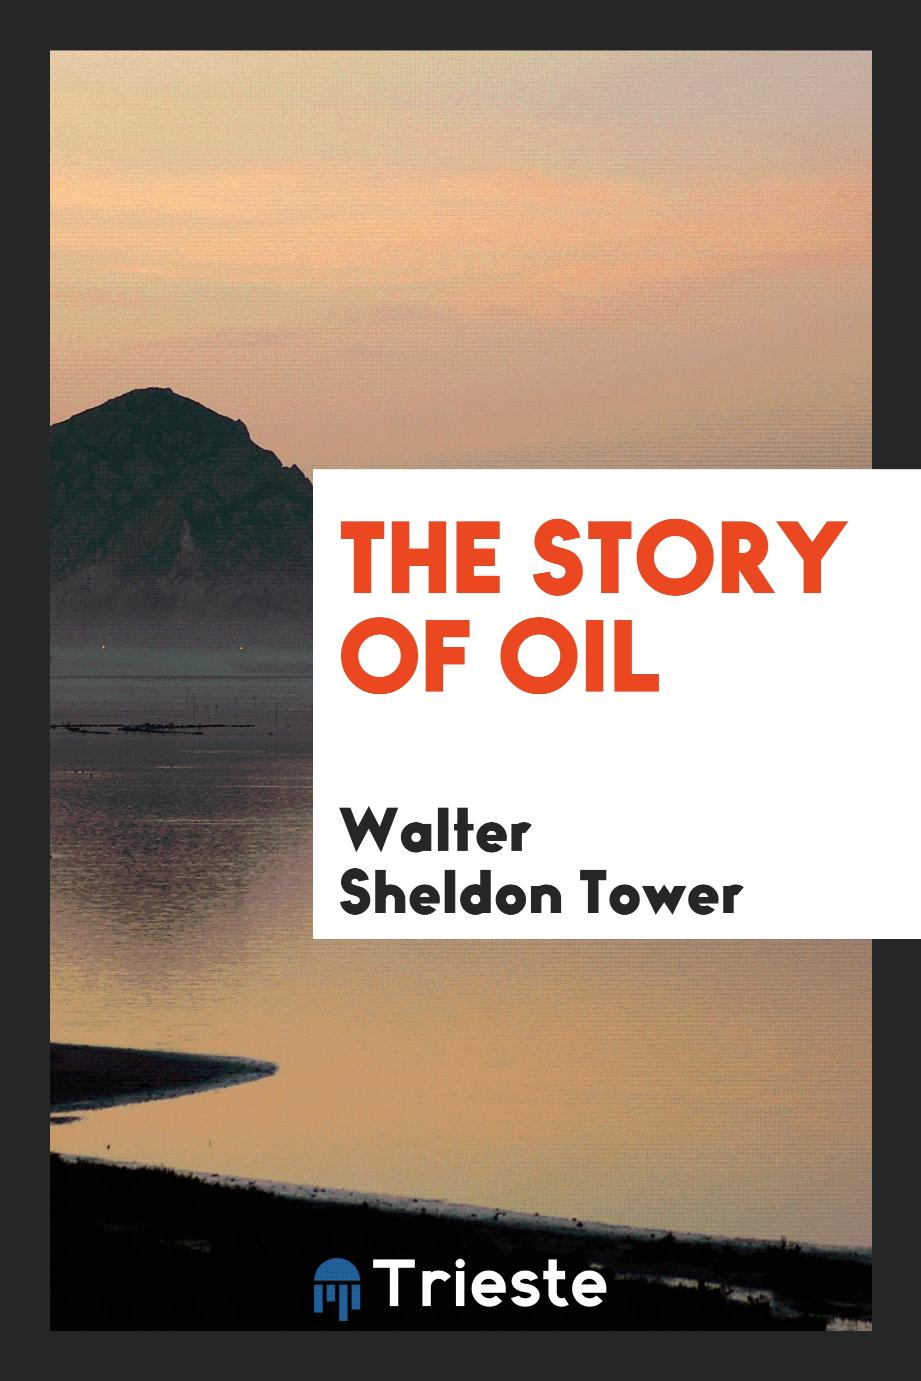 The story of oil